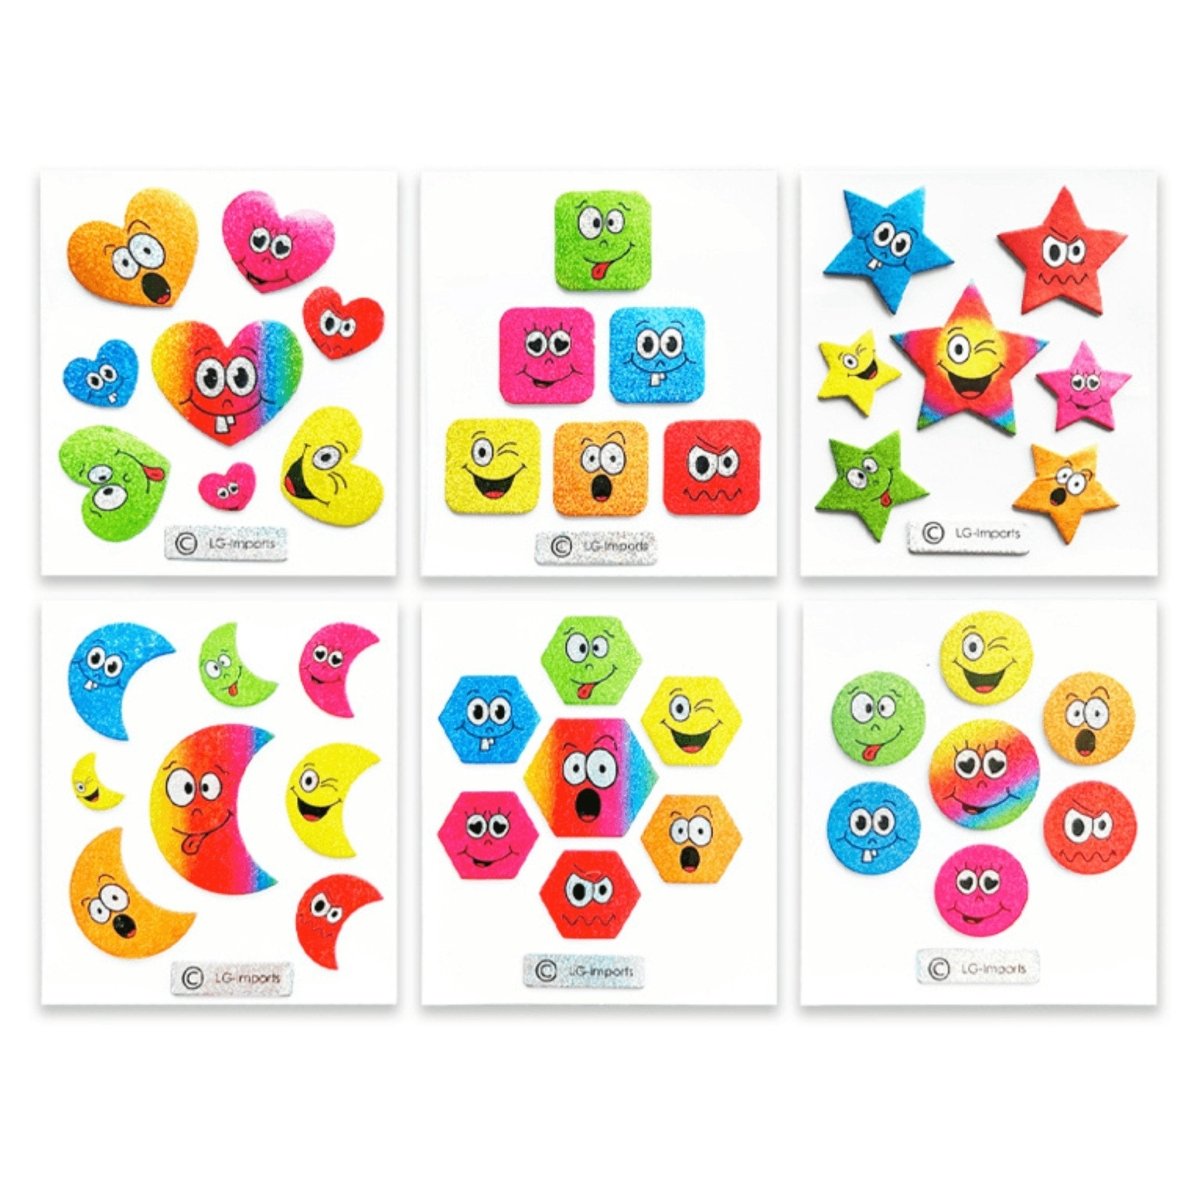 Funny Faces Mini Puffy Sticker Sheet - Kids Party Craft